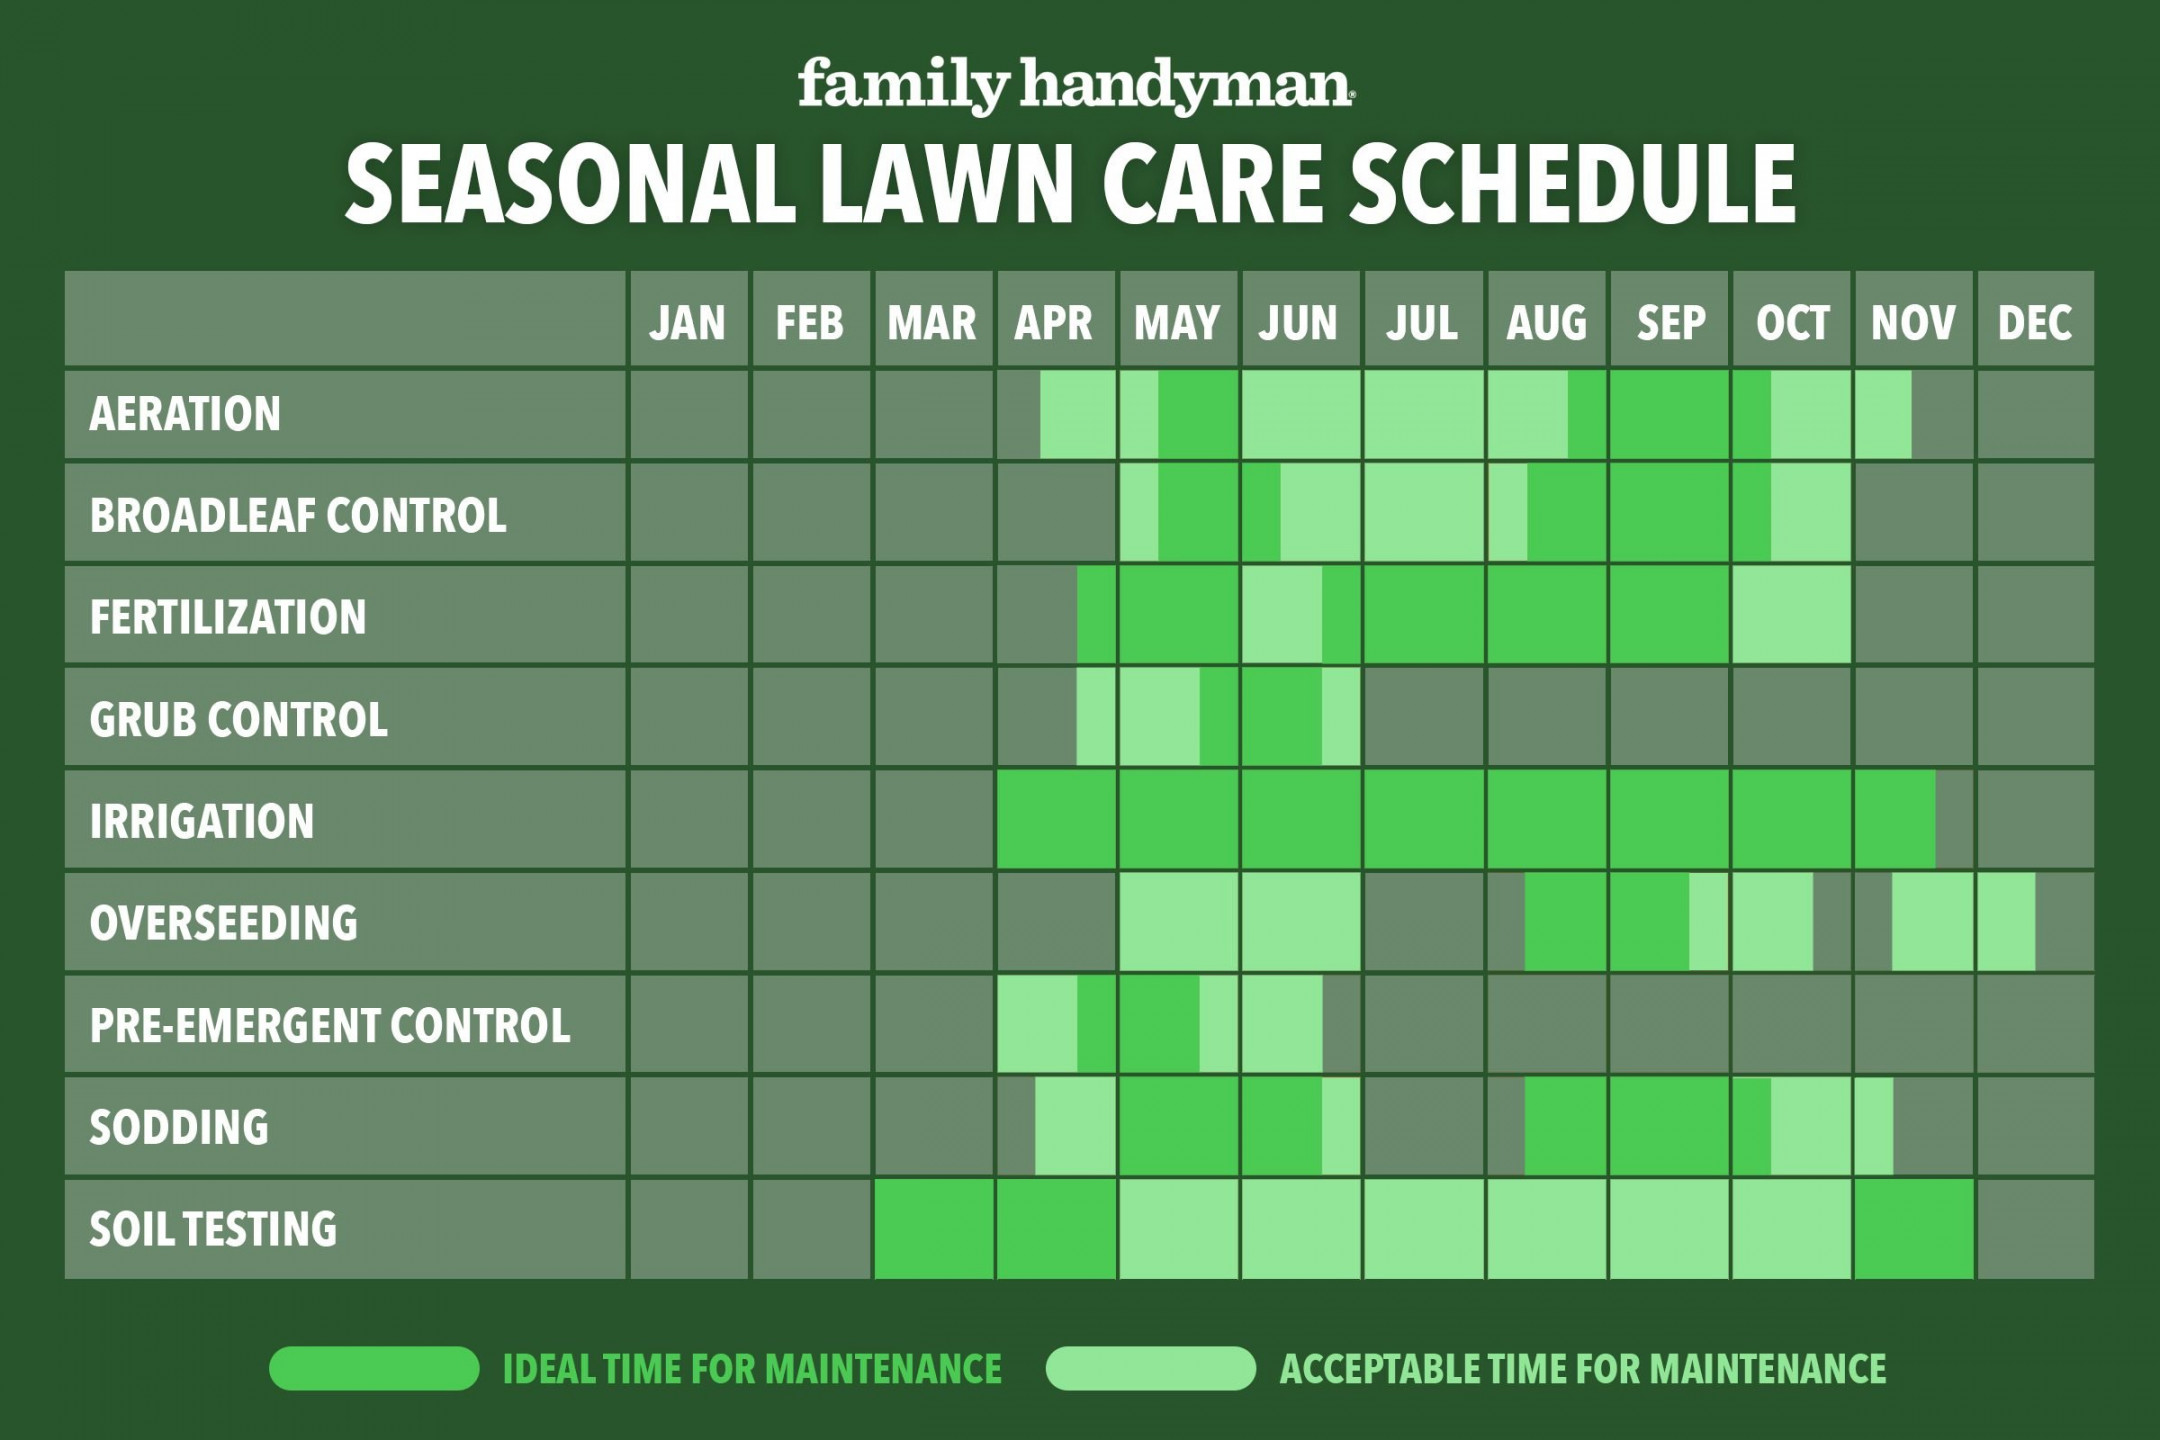 A Complete Lawn Maintenance Schedule for the Year